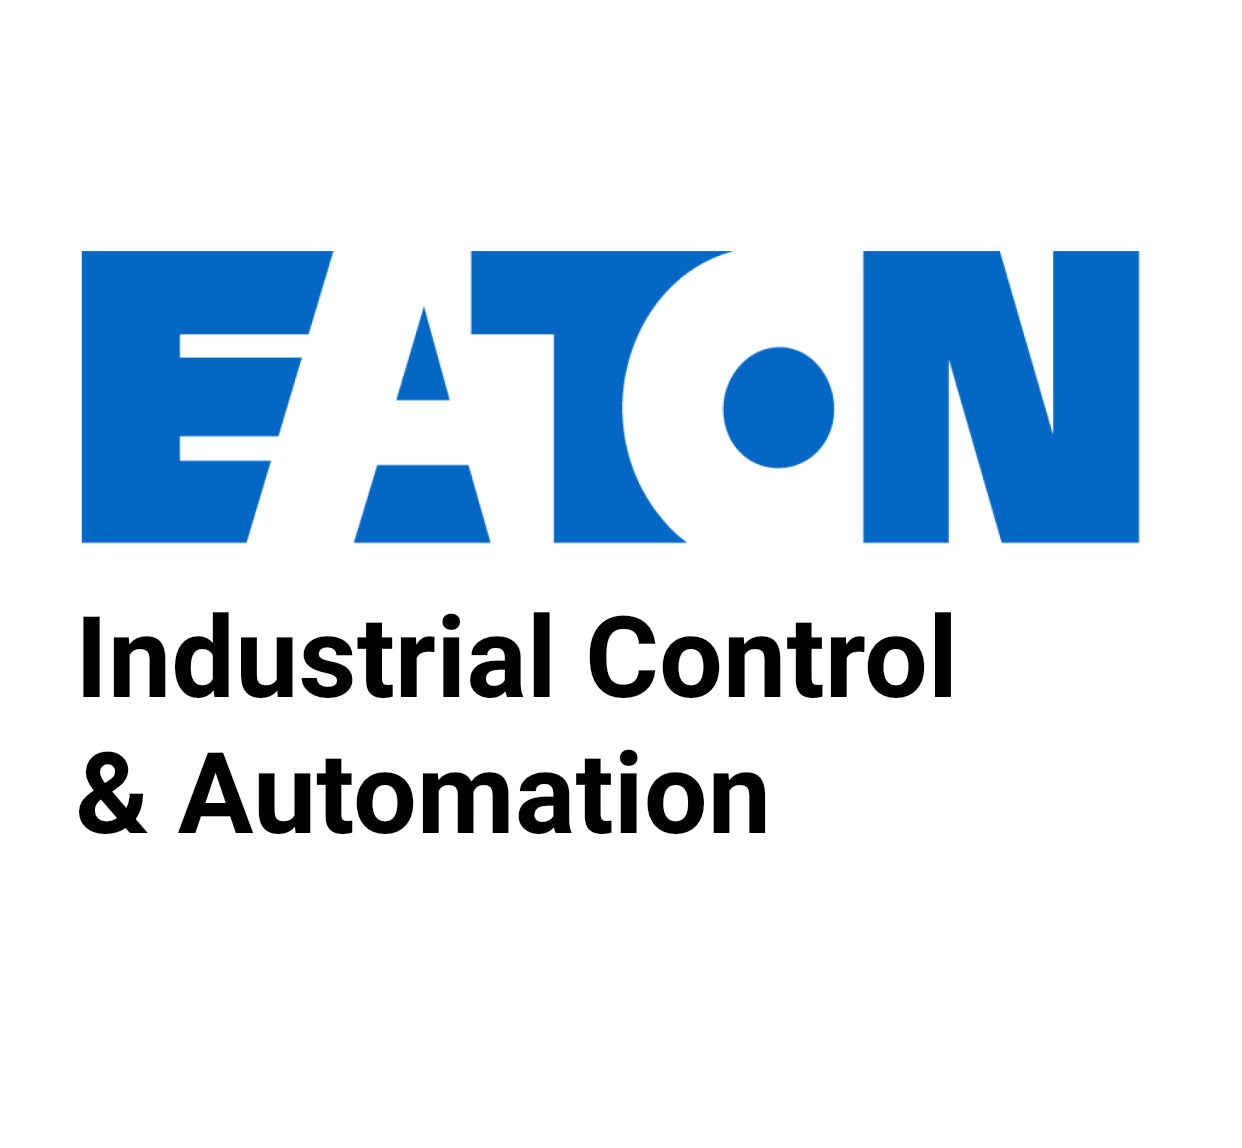 EATON INDUSTRIAL CONTROL & AUTOMATION